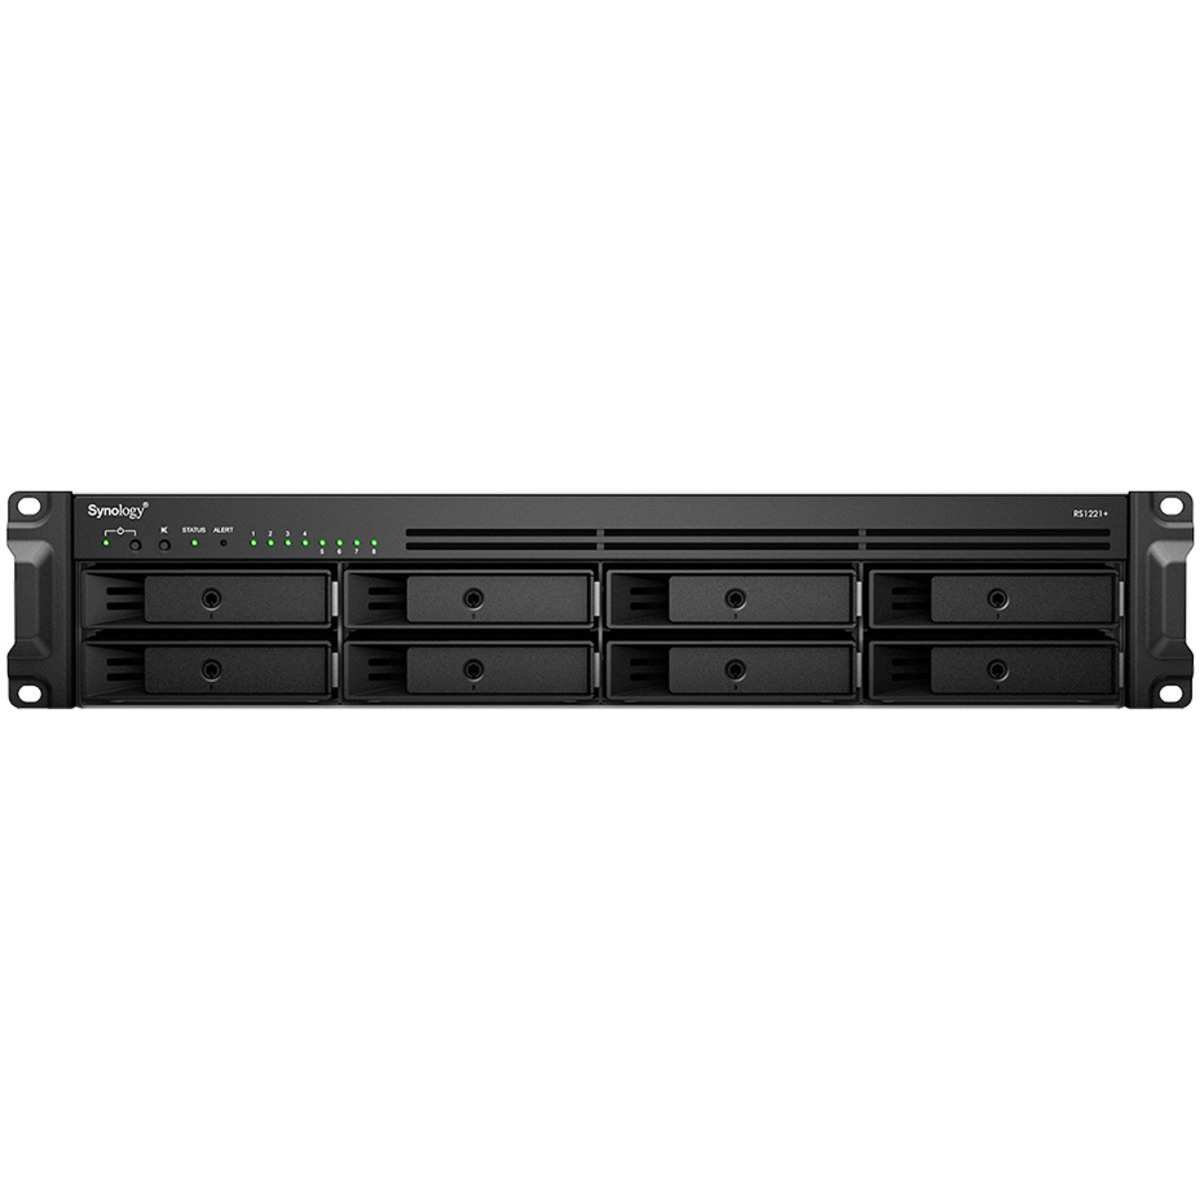 Synology RackStation RS1221+ 48tb 8-Bay RackMount Multimedia / Power User / Business NAS - Network Attached Storage Device 4x12tb Western Digital Gold WD121KRYZ 3.5 7200rpm SATA 6Gb/s HDD ENTERPRISE Class Drives Installed - Burn-In Tested RackStation RS1221+